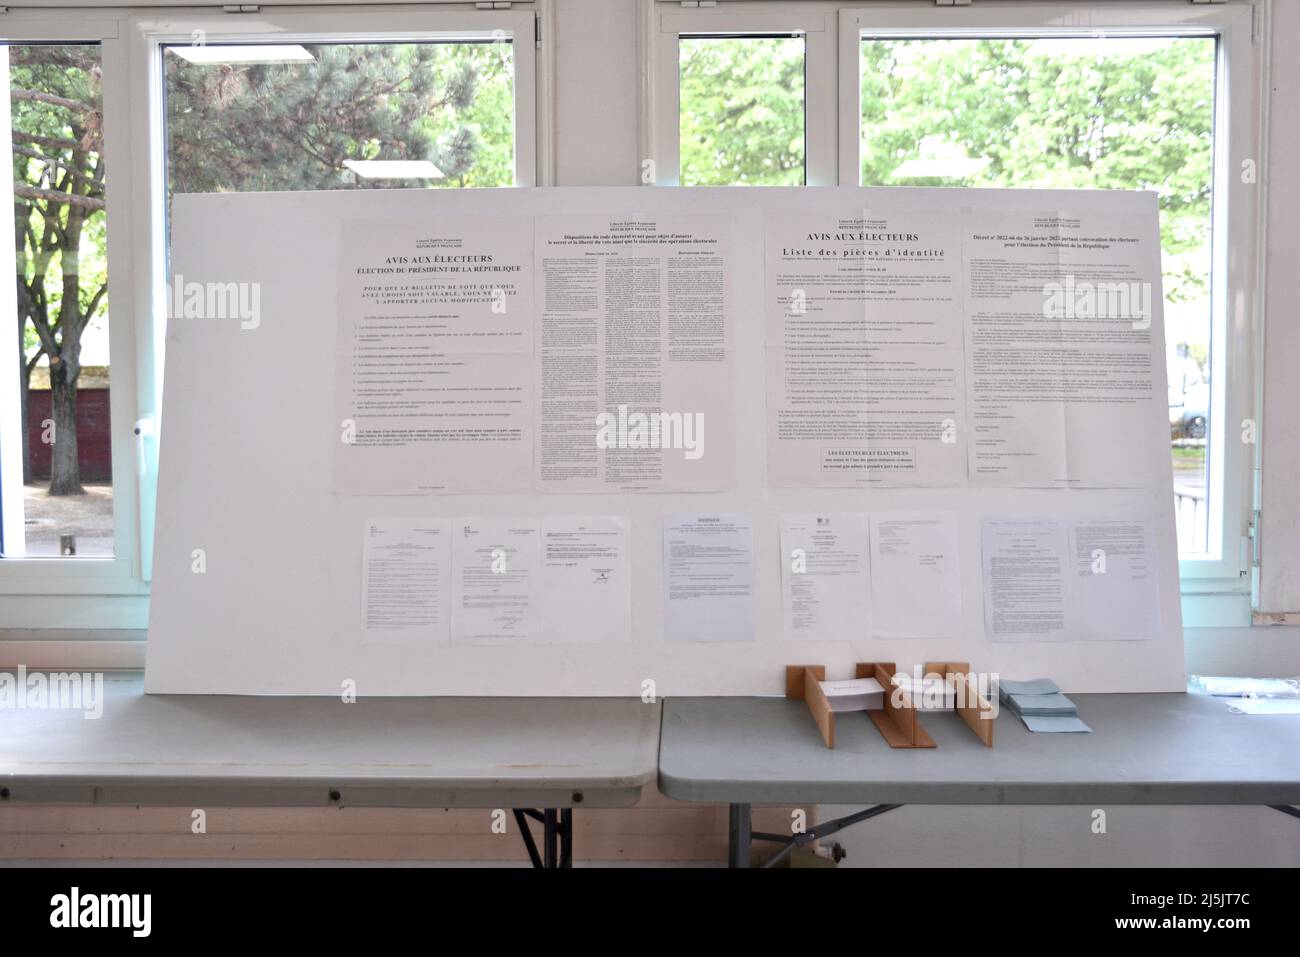 Second round of the French presidential election in Saint-Gratien, France, on April 24, 2022. In the avenue leading to the school housing the voting booths, the posters of the two candidates are torn down. Photo by Pierrick Villette/aBACAPRESS.COM Stock Photo